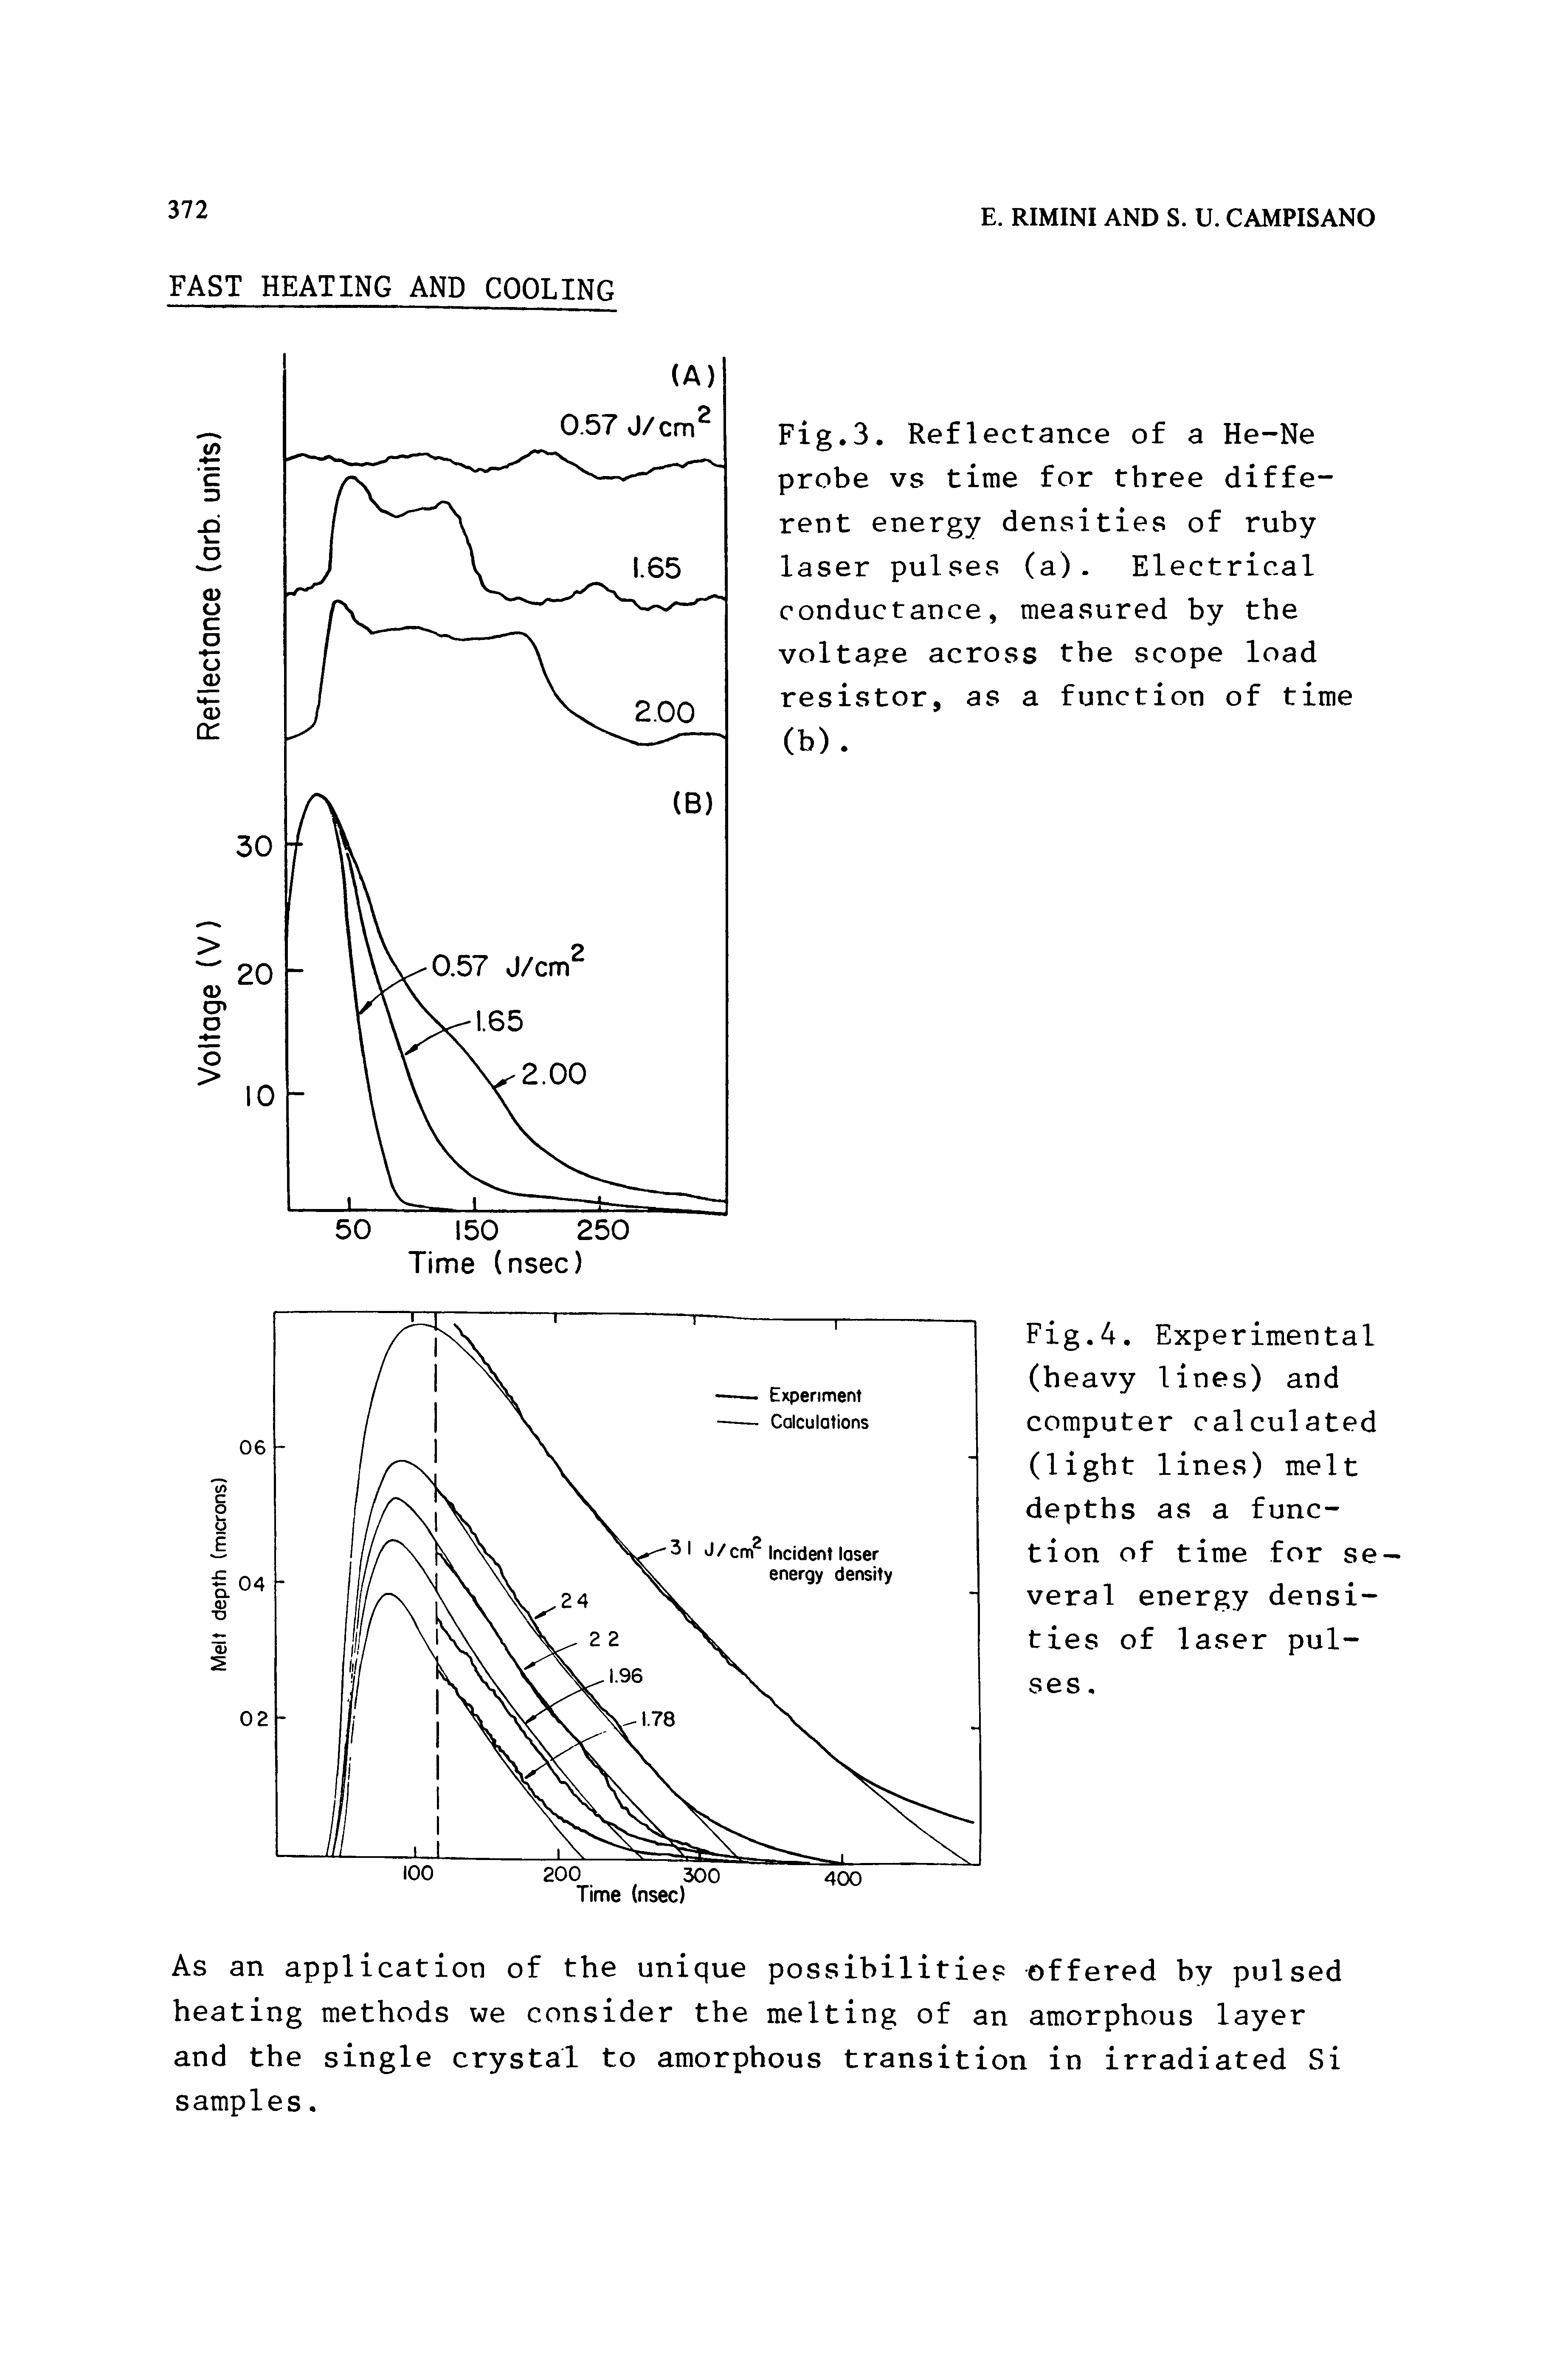 Fig.4. Experimental (heavy lines) and computer calculated (light lines) melt depths as a function of time for several energy densities of laser pulses. ...